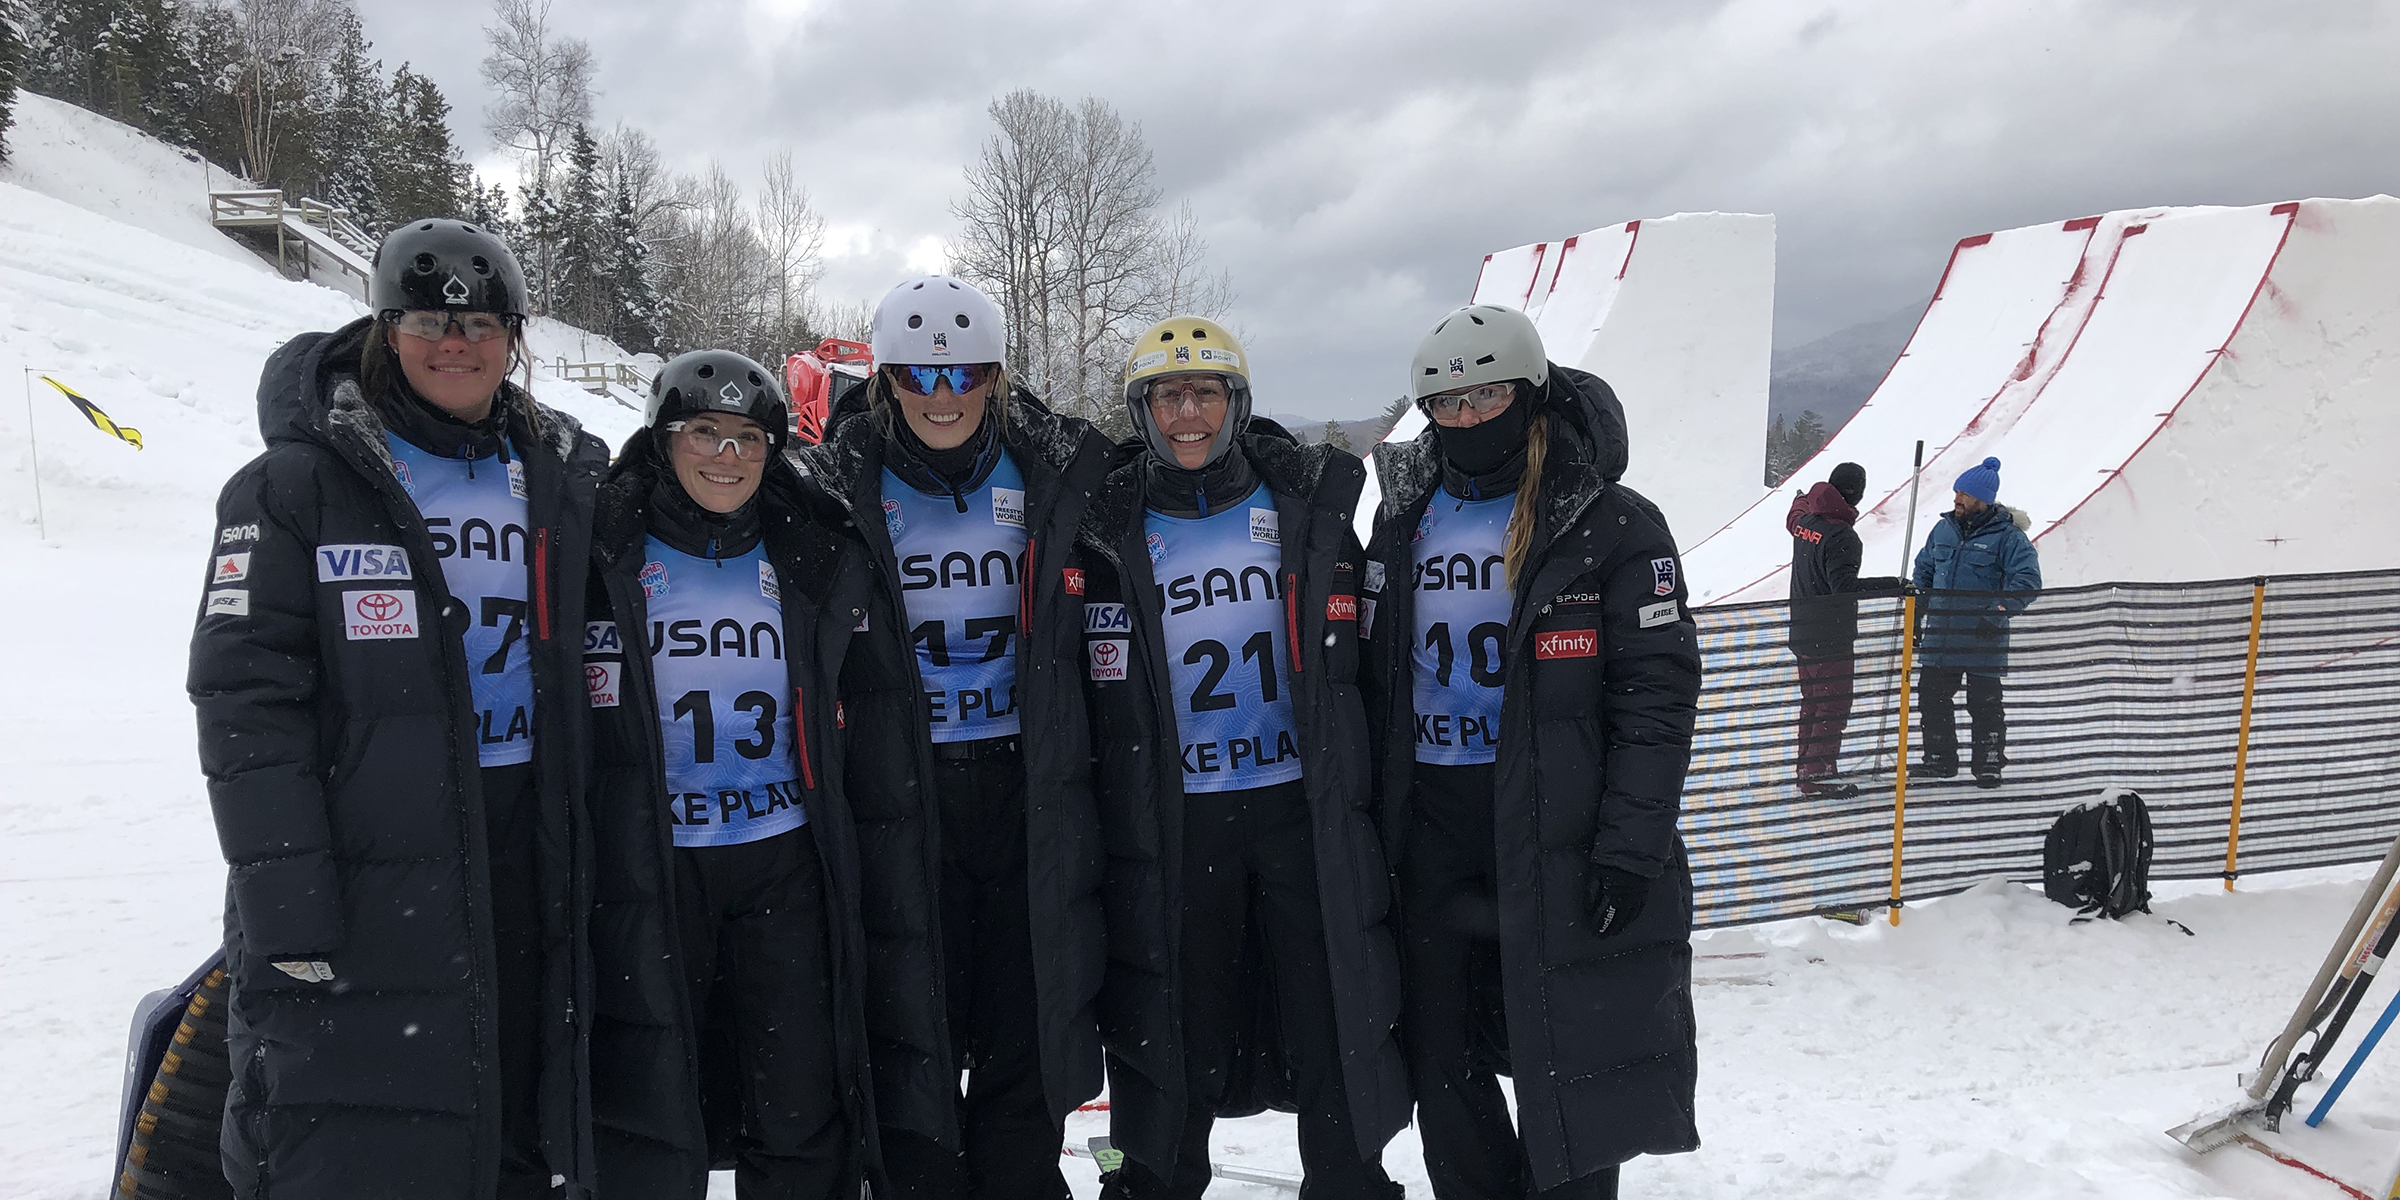 Kaila Kuhn, Madison Varmette, Megan Nick, Winter Vinecki and Morgan Northrop at the Olympic Jumping Complex in Lake Placid, New York